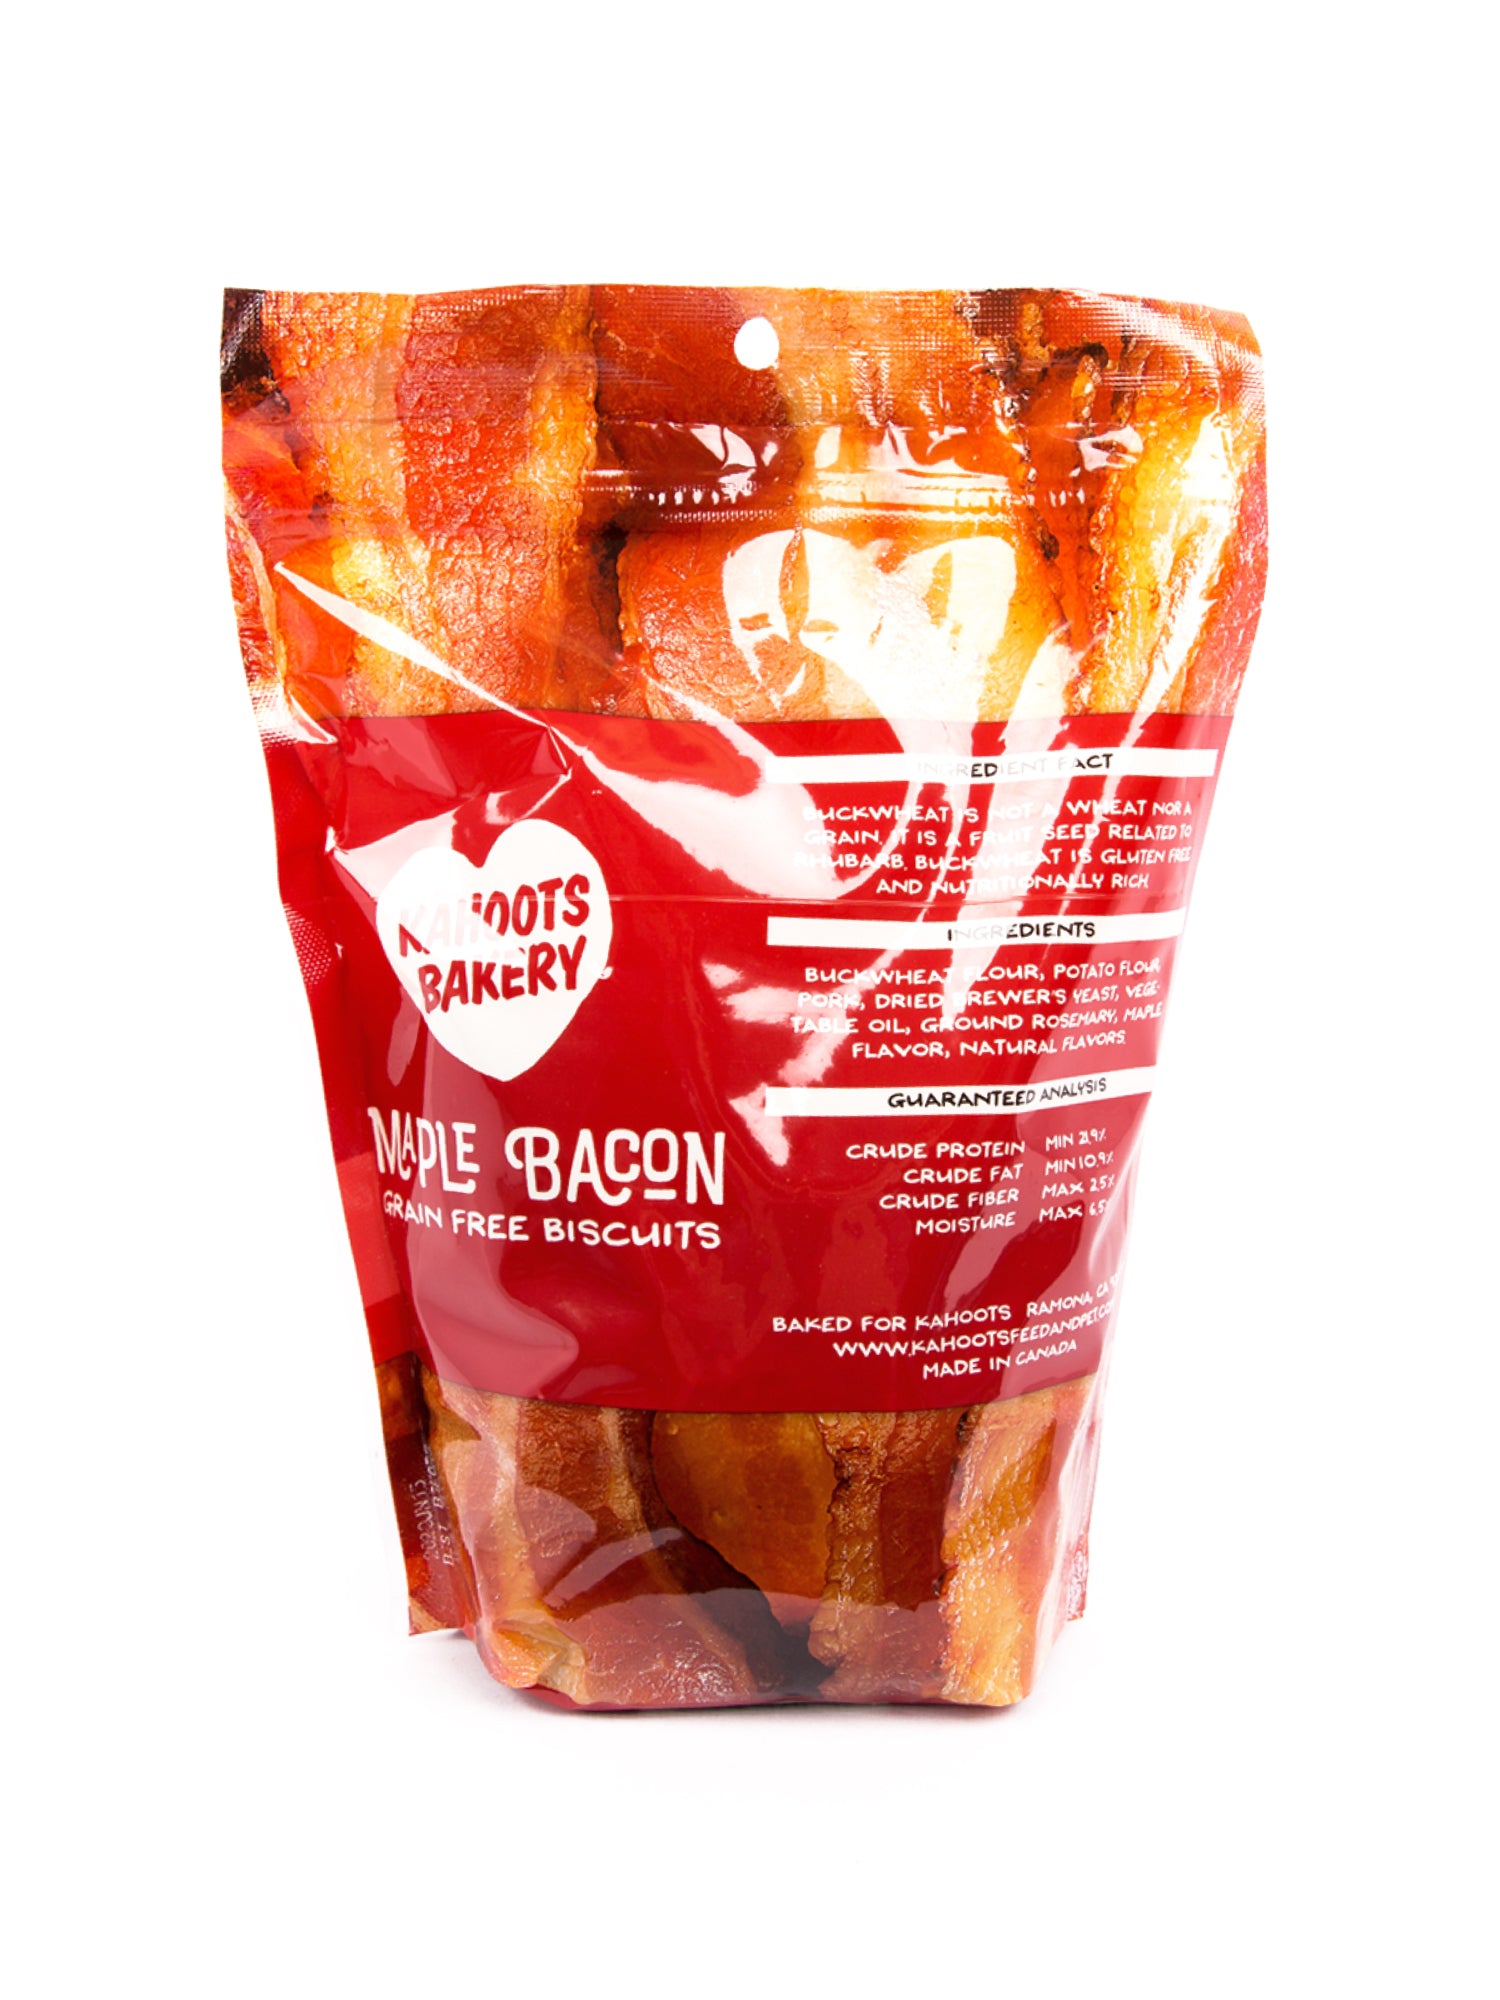 Back label of grain-free maple bacon dog biscuits